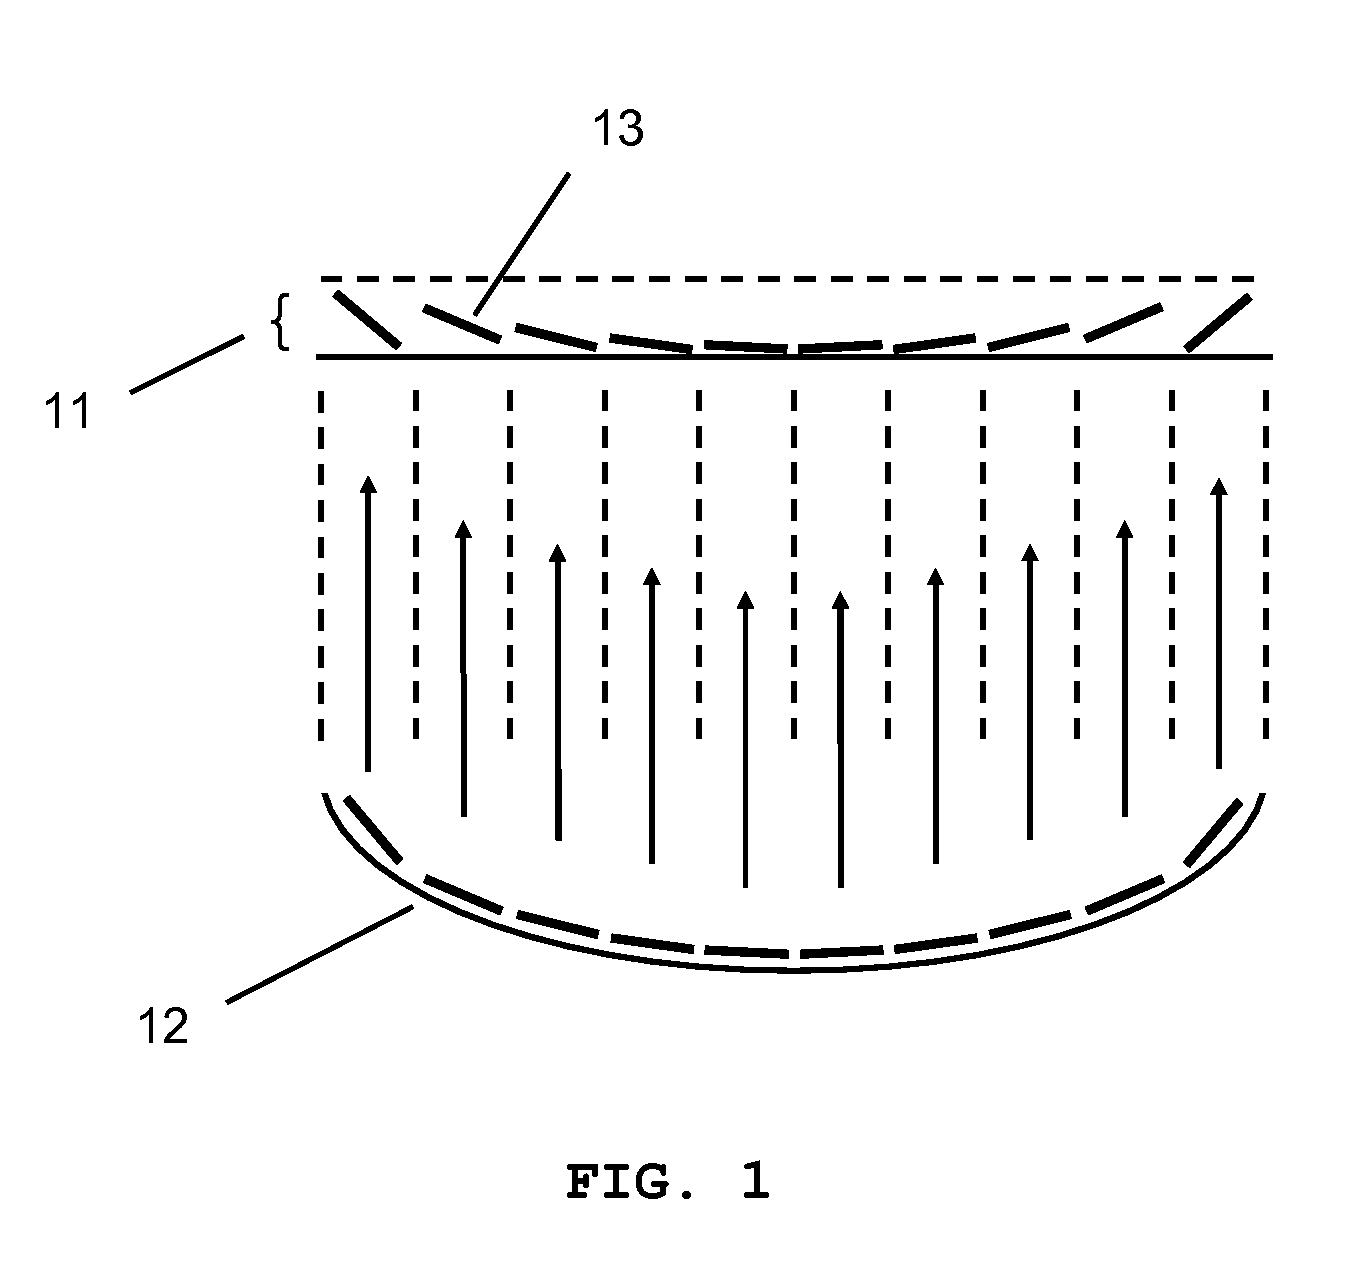 Micromirror arry lens with optical surface profiles